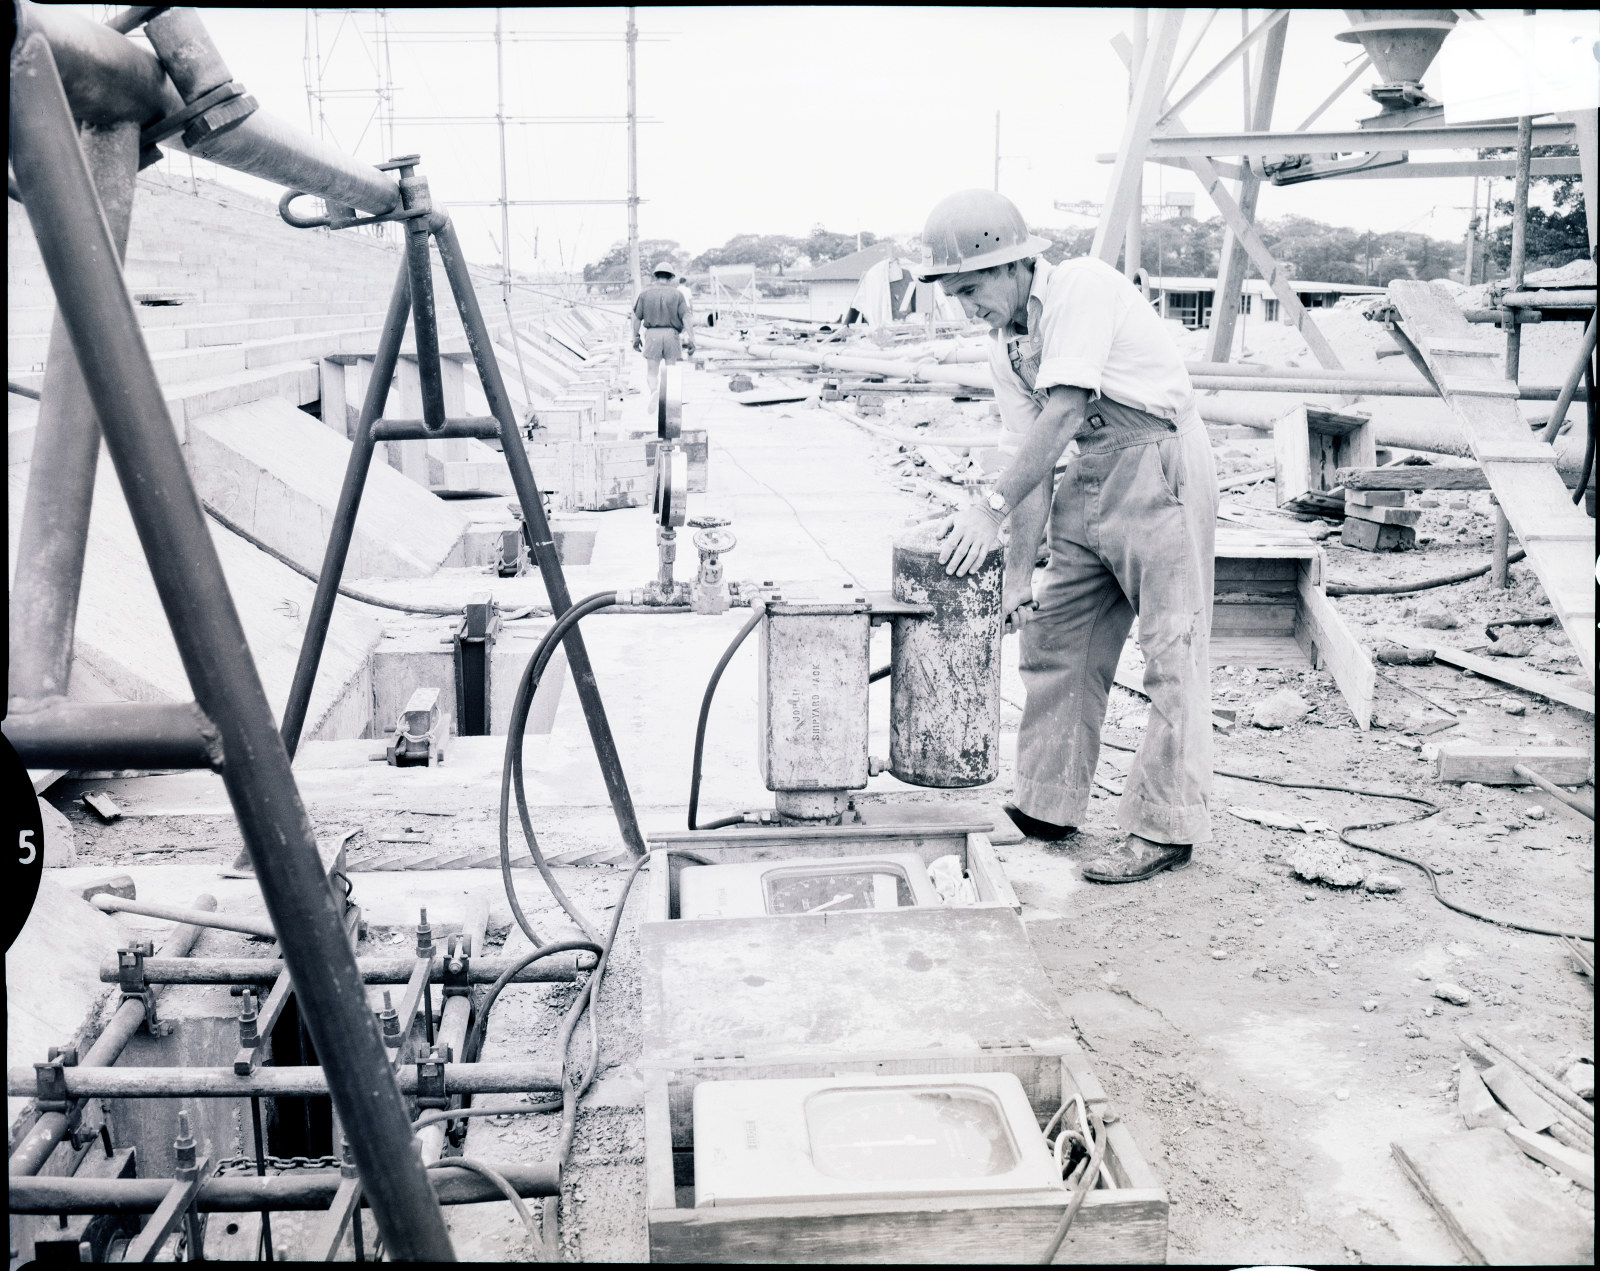 Government Printing Office 2 - 18181 - Sydney Opera House, part IV [Public Works Department; building construction; labourers] [GPO original locations or series - St61060] [27/11/1962]